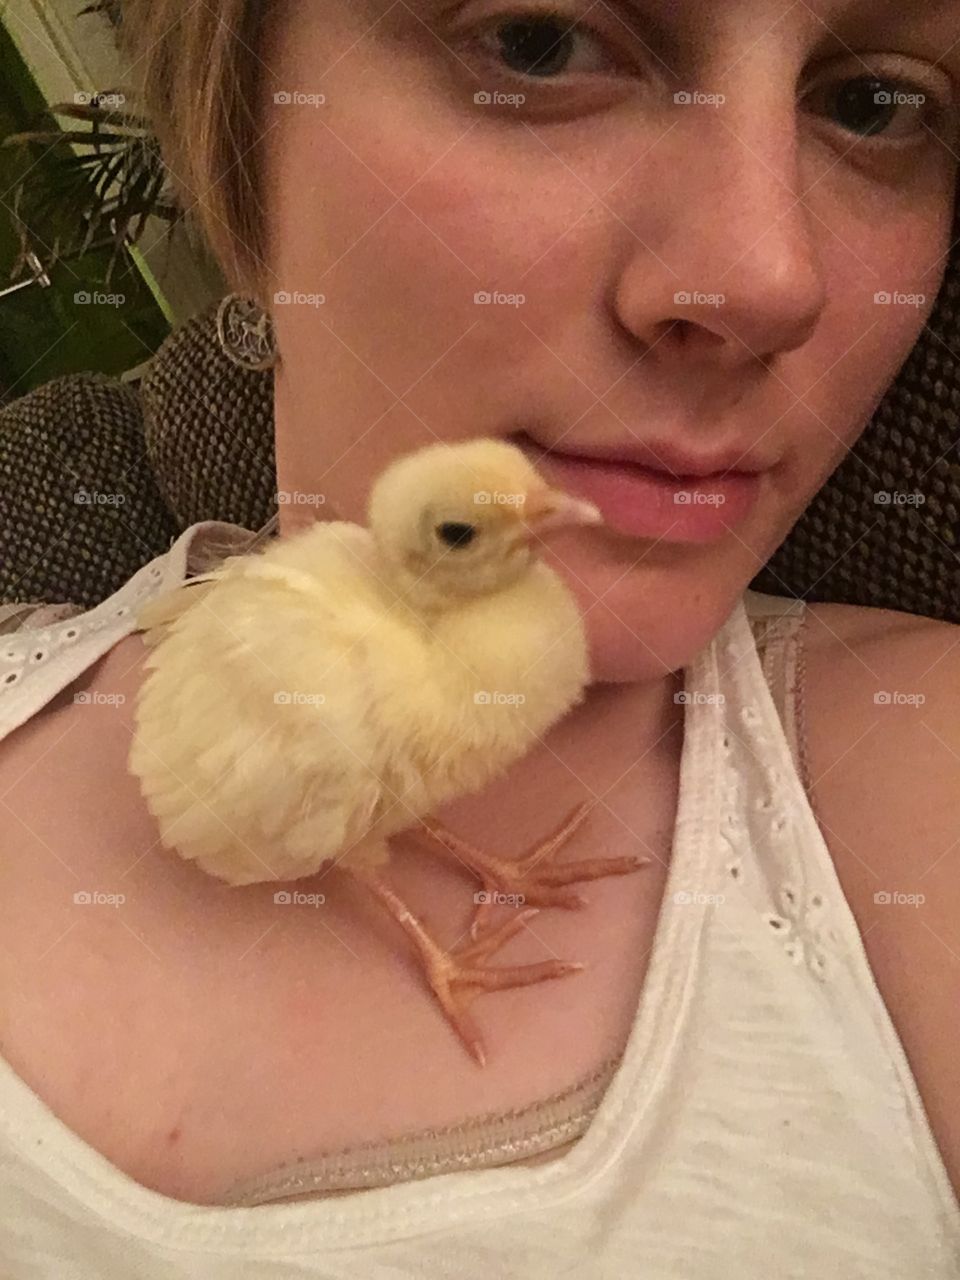 My first baby peacock, whose legs I straightened myself, stands up on my chest and gives me a good cuddle